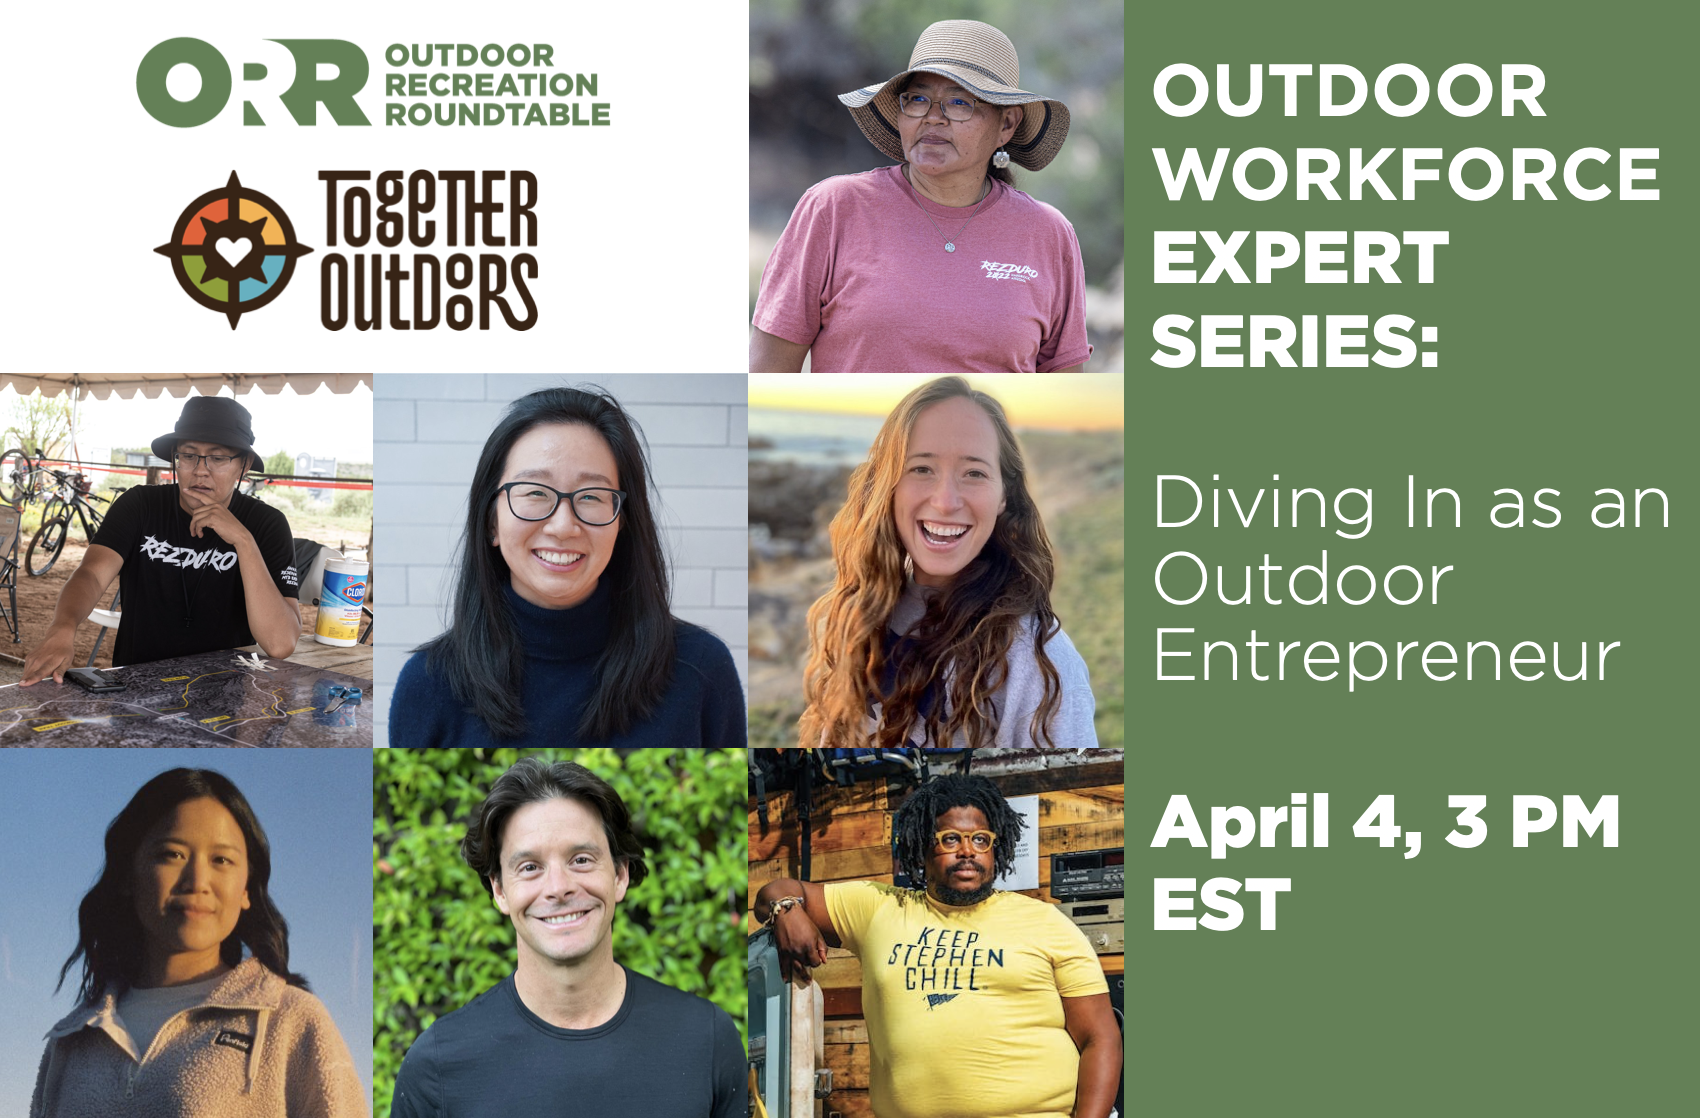 ORR/Together Outdoors Outdoor Workforce Expert Series: Diving in as an Outdoor Entrepreneur